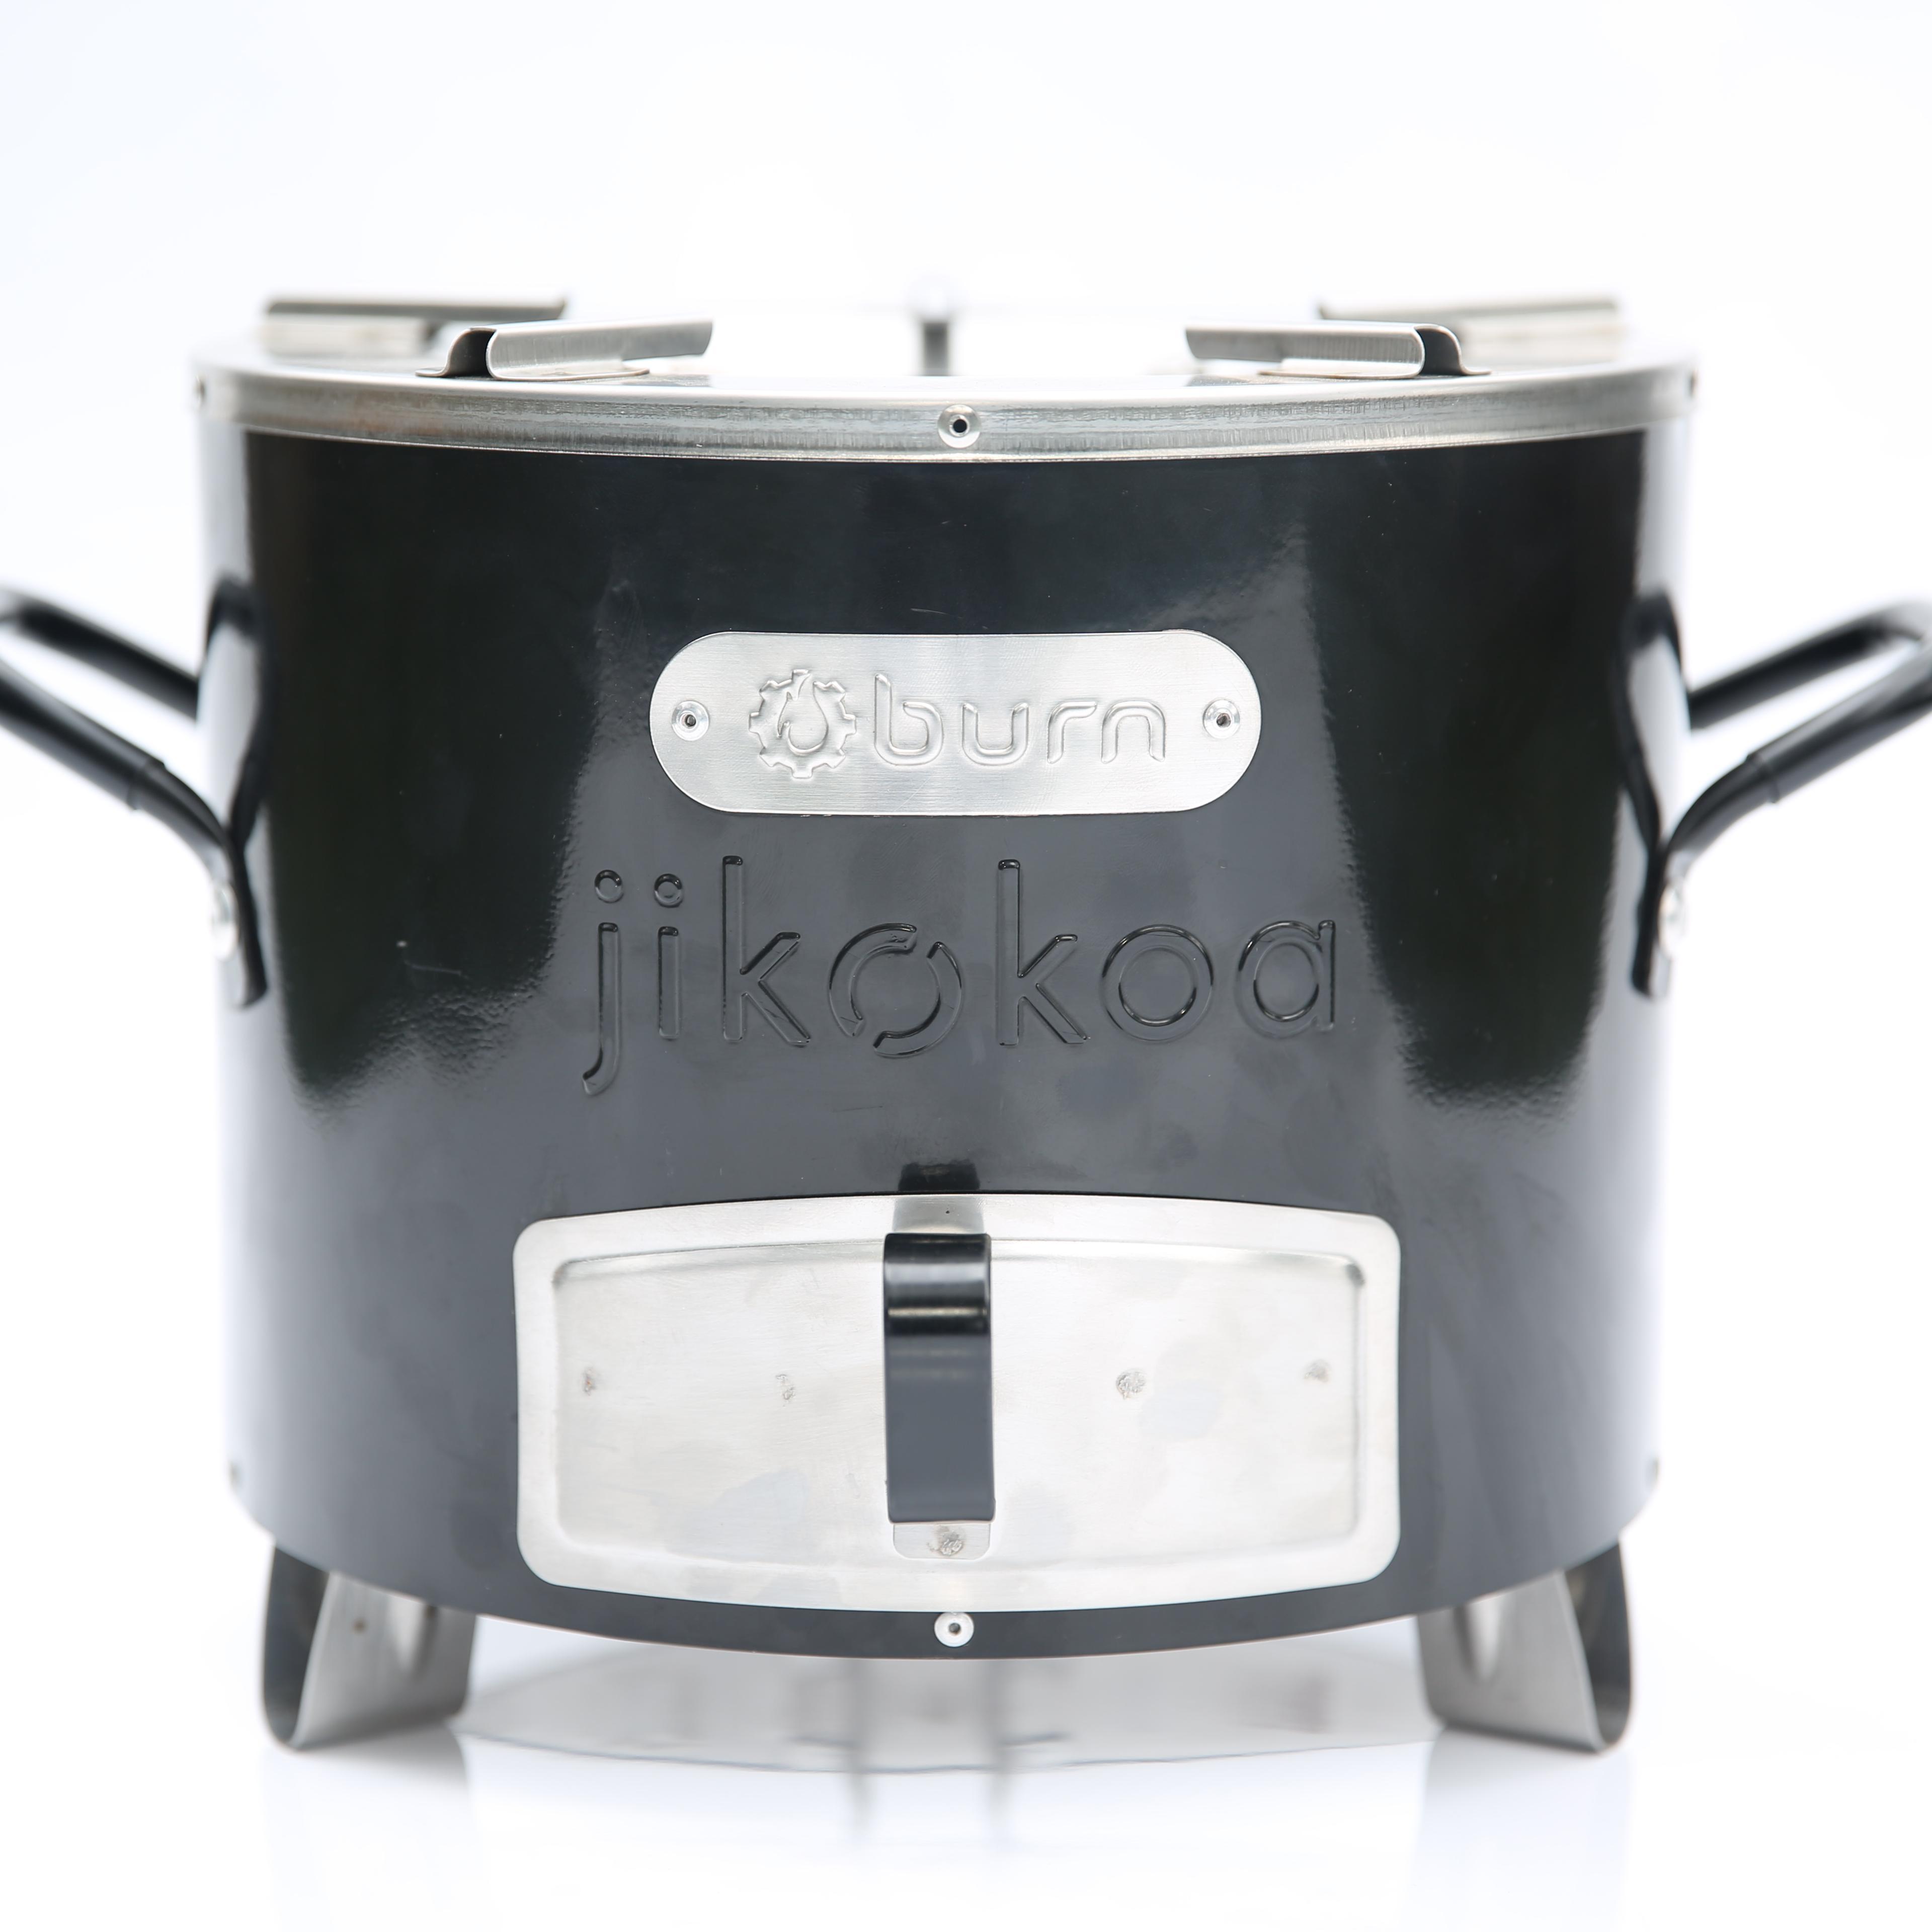 Revolutionizing the clean cookstove movement in east Africa. Saving lives and forests through design and local manufacture of clean burning cookstoves.